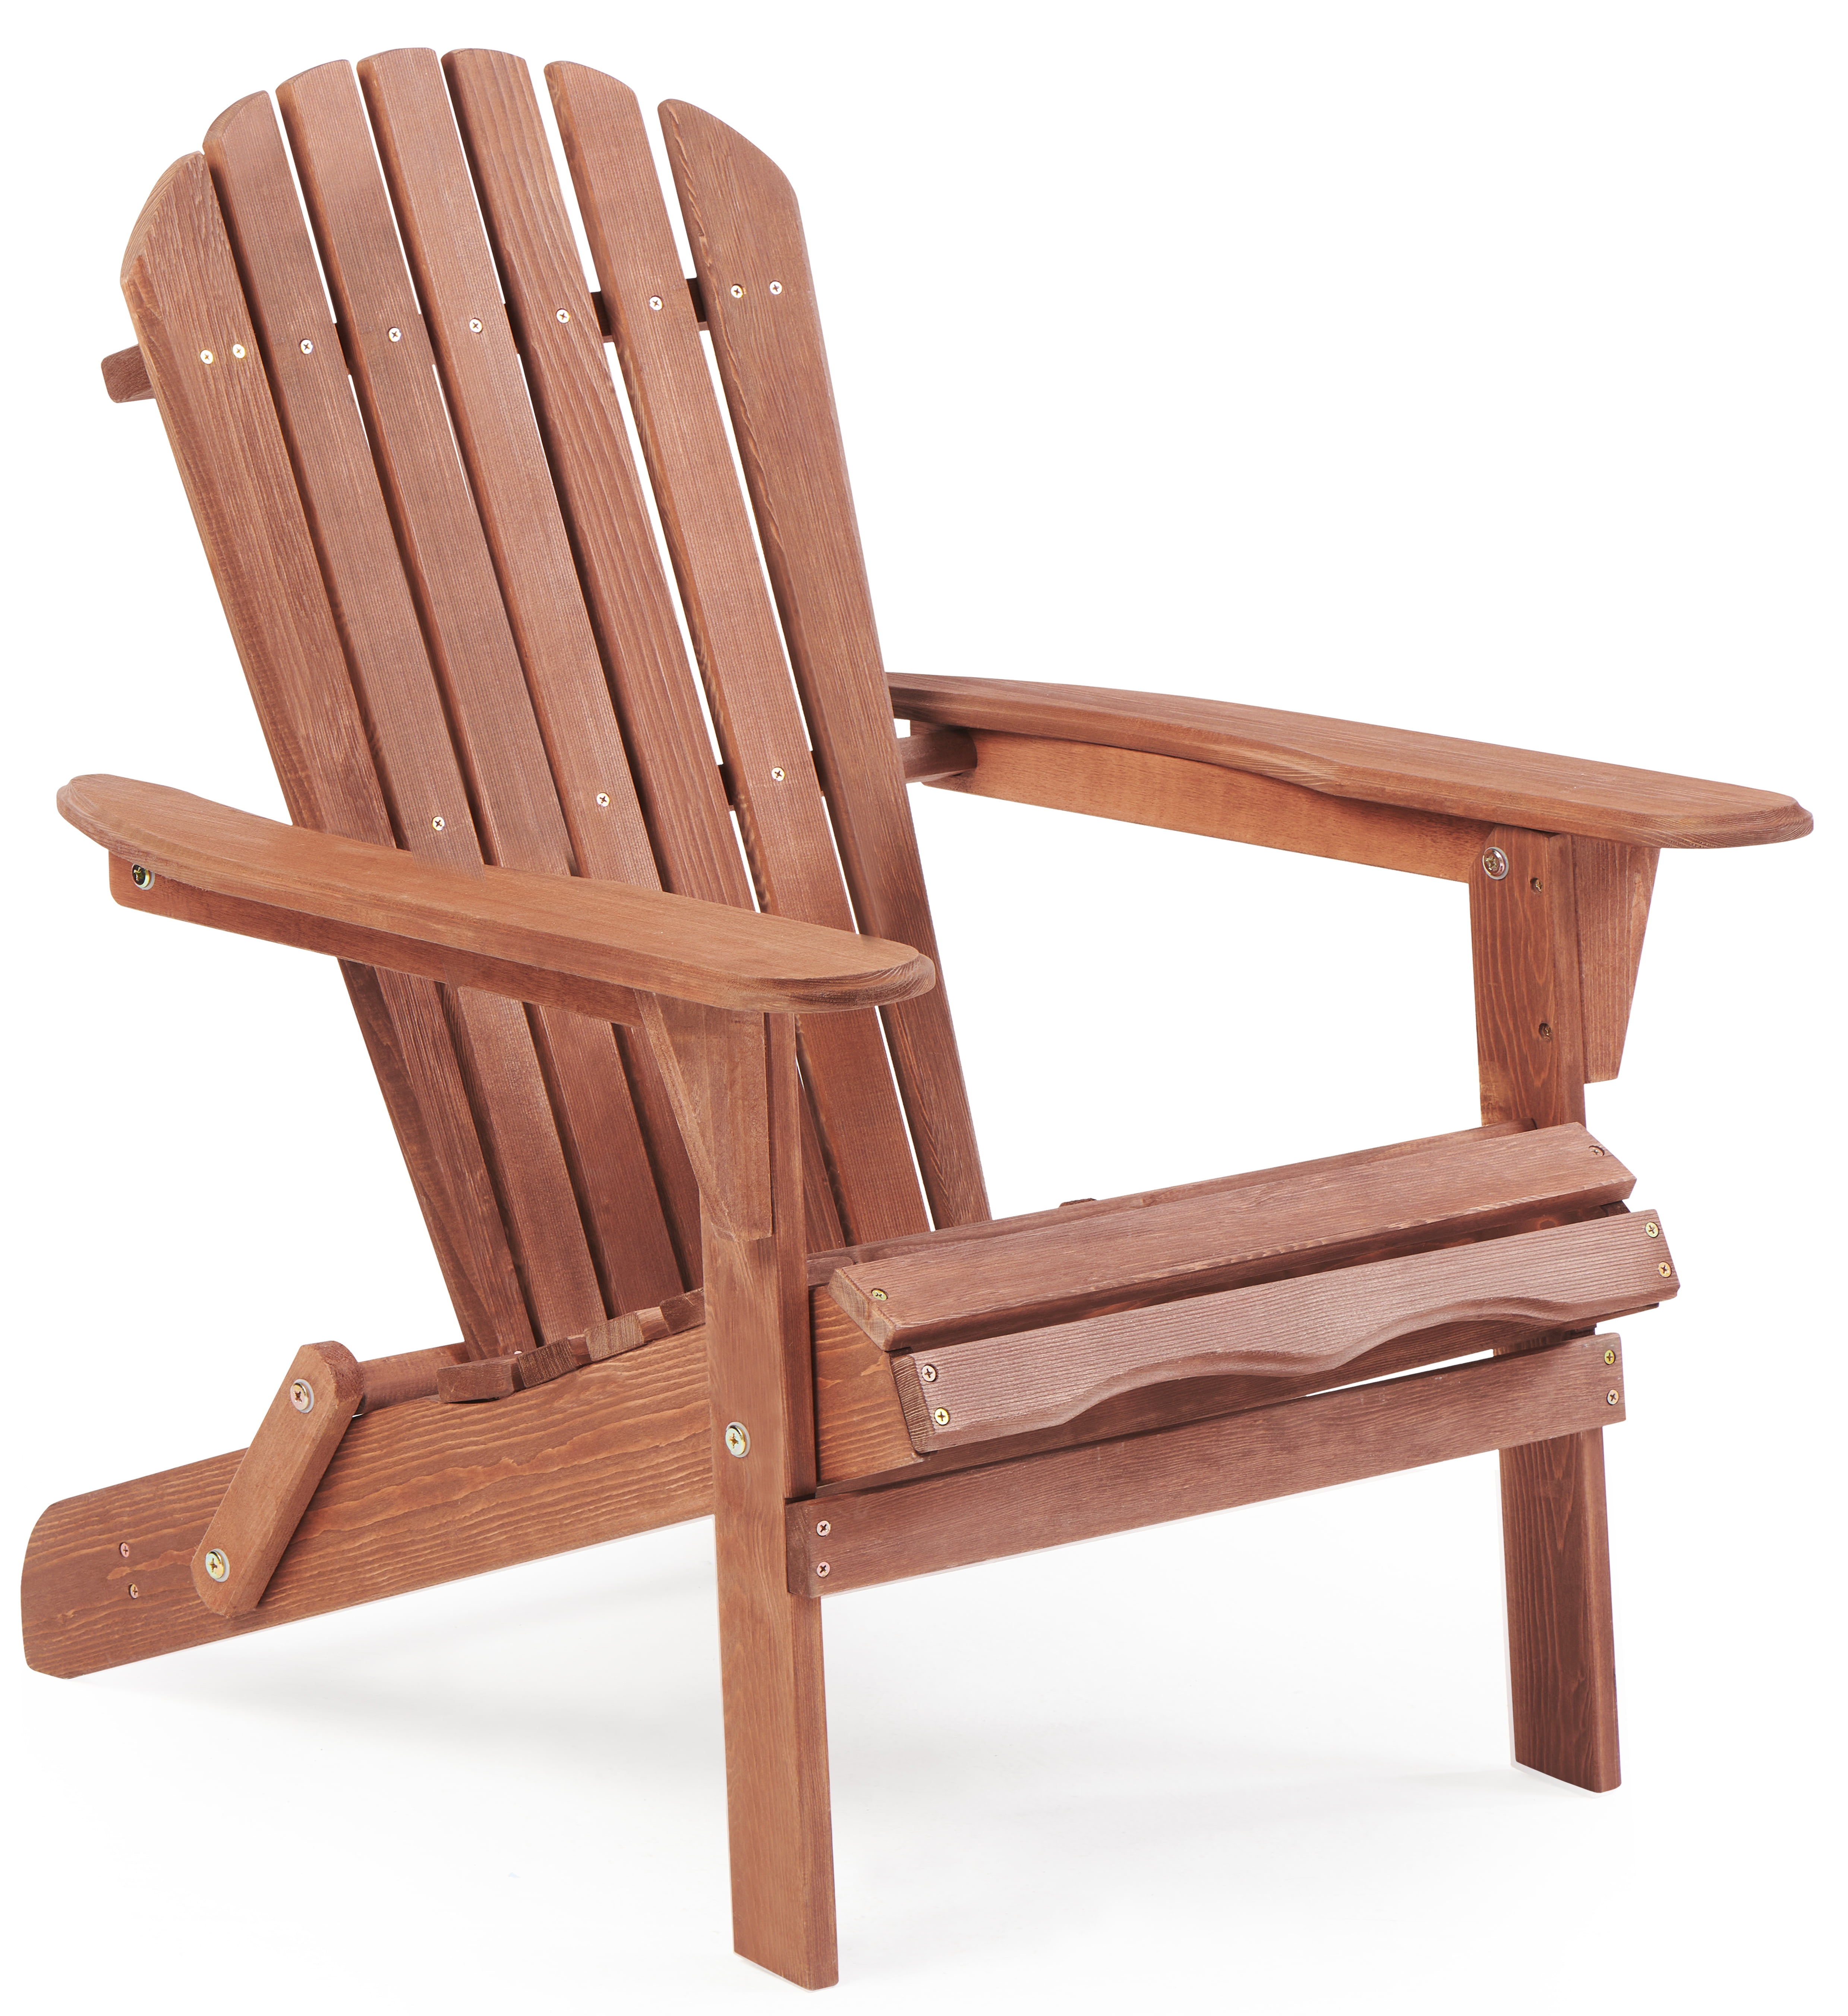 Garden Weather Resistant 1 Chair Patio Plastic Adirondack Chair for Lawn Coffee Patio Watcher Poly Lumber Classic Adirondack Chair with Cup Holder Backyard Deck 